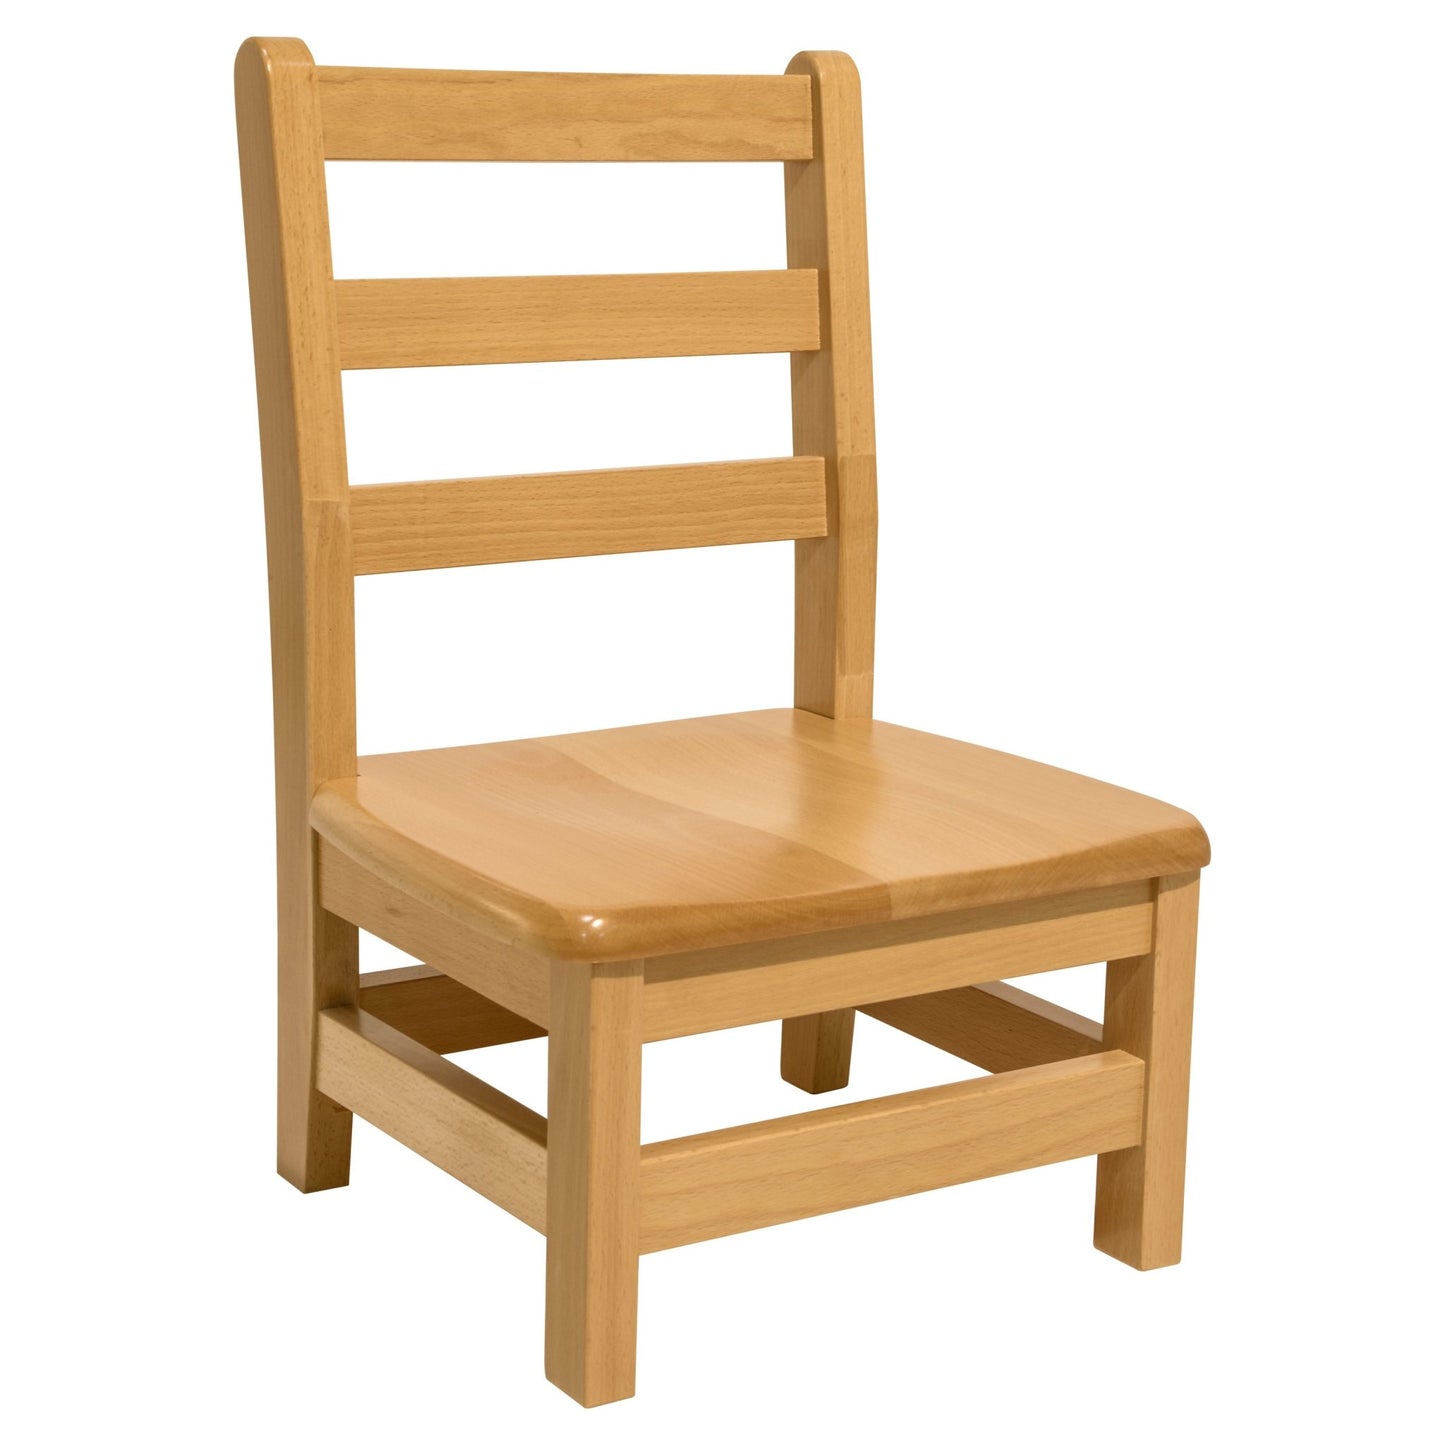 Wood Designs 8" Chair, Carton of (2) - (80802) - SchoolOutlet